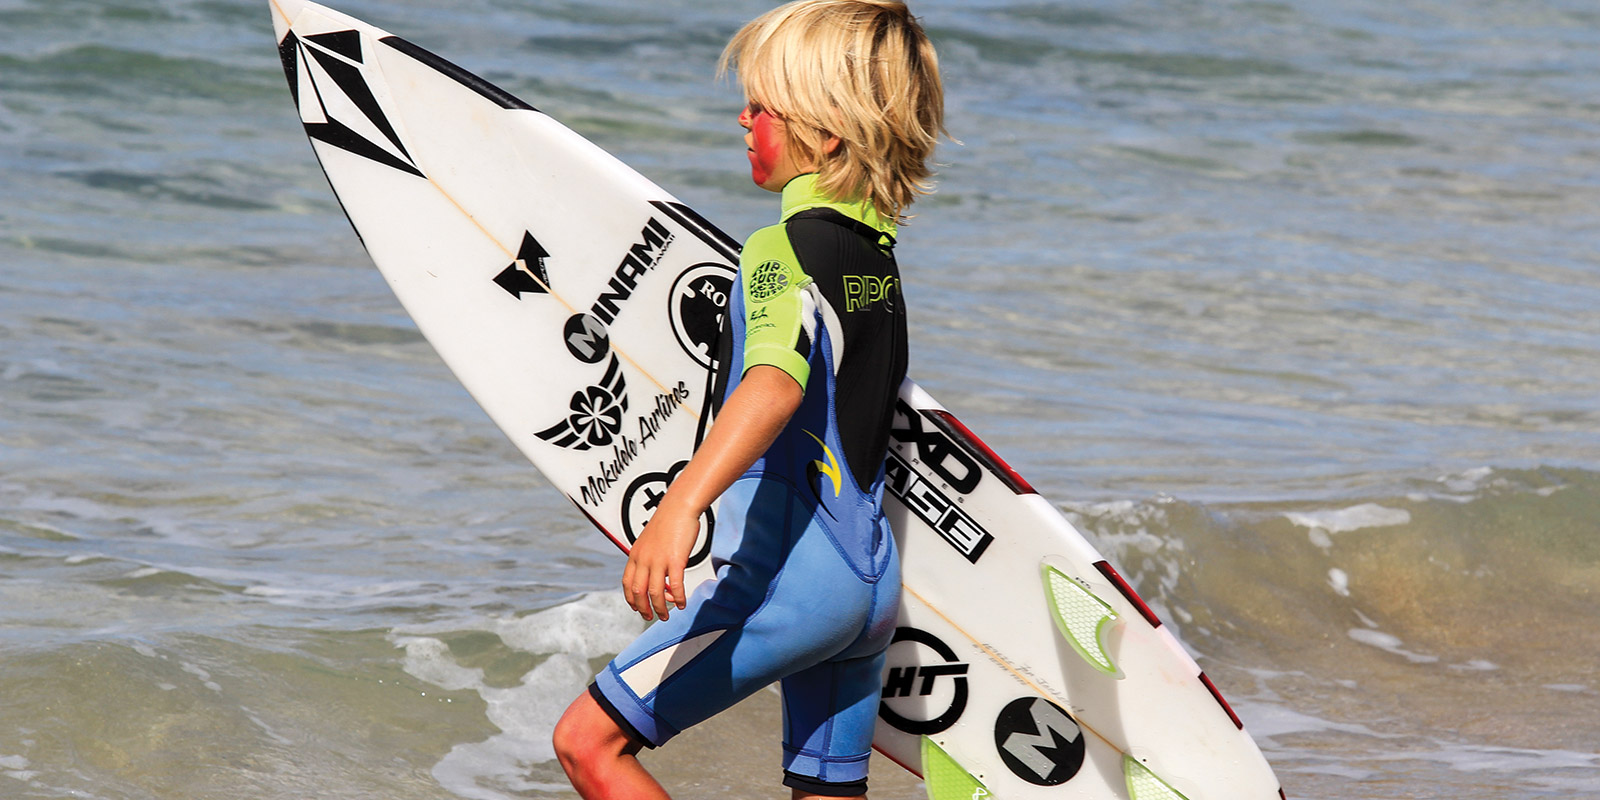 photo of a kid carying a surfboard